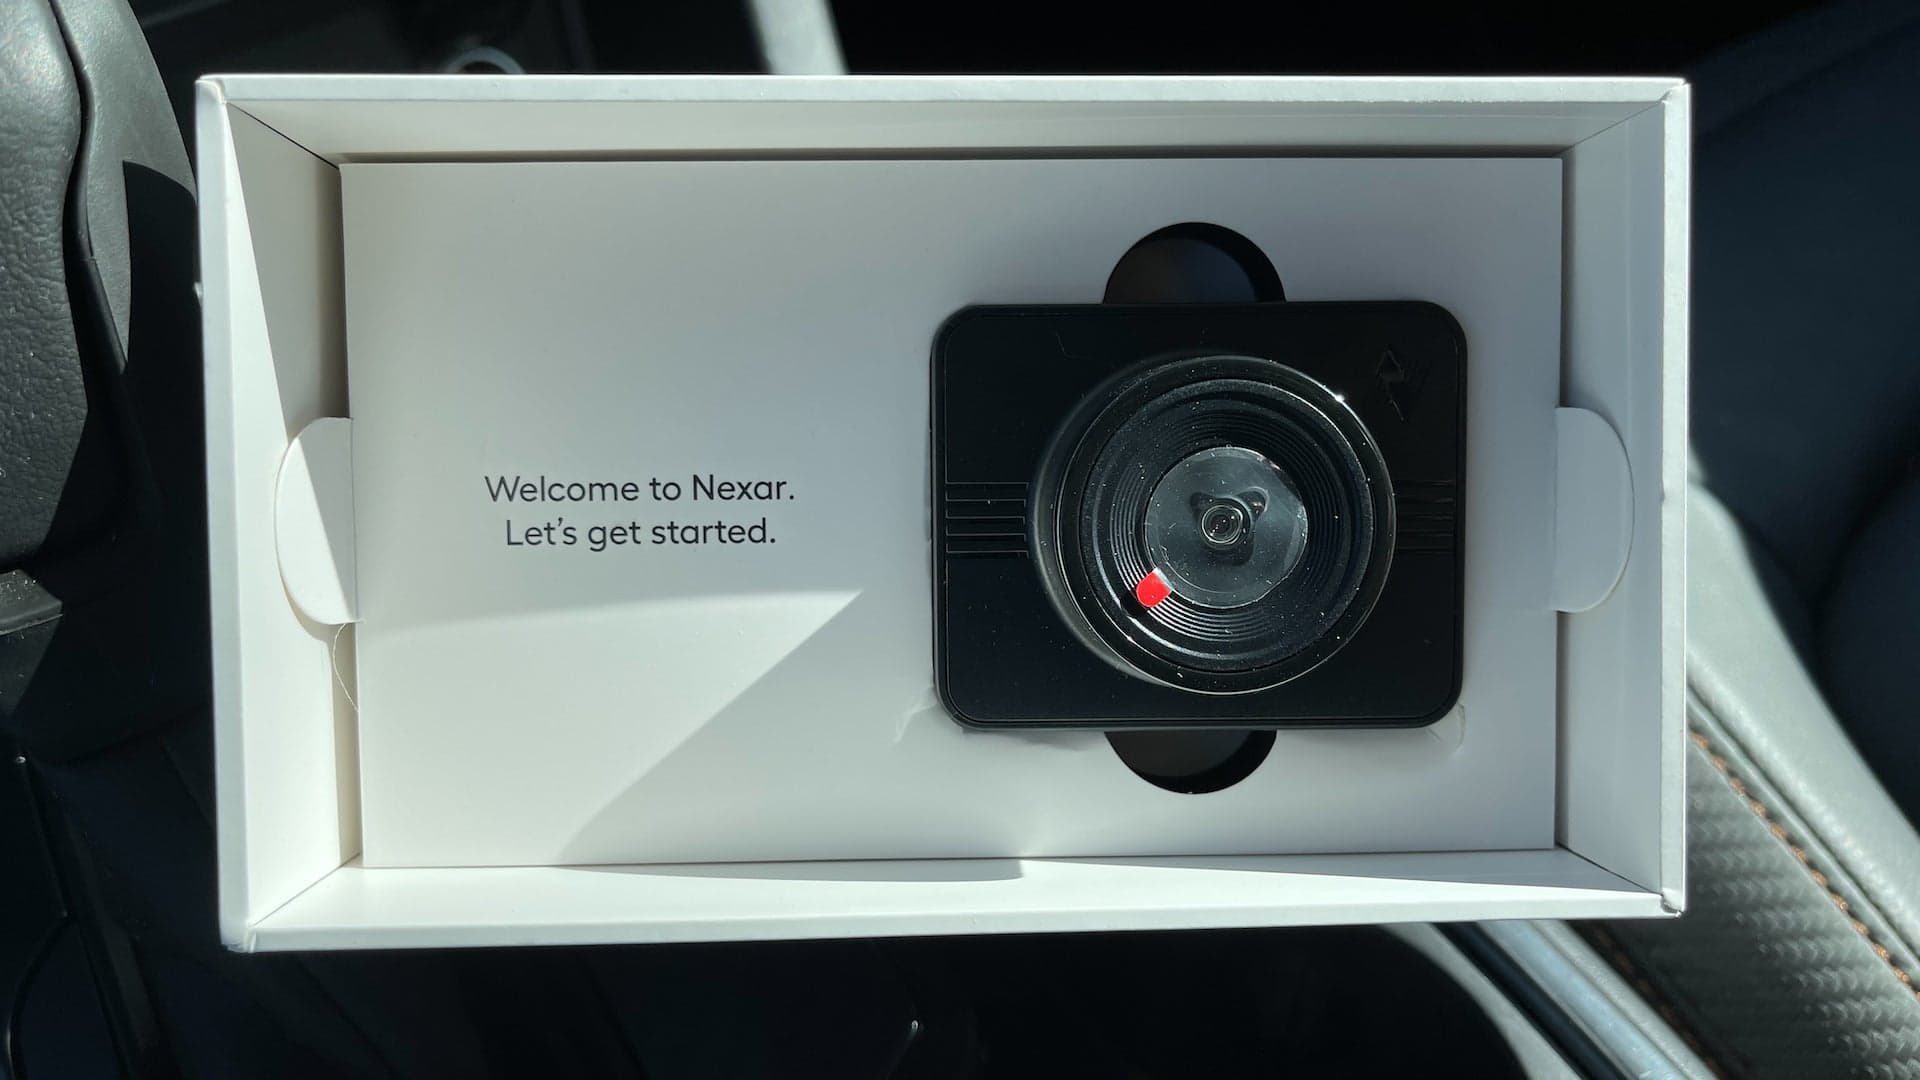 Few Dash Cams Beat the Nexar Beam in Features and Quality for the Price: Review